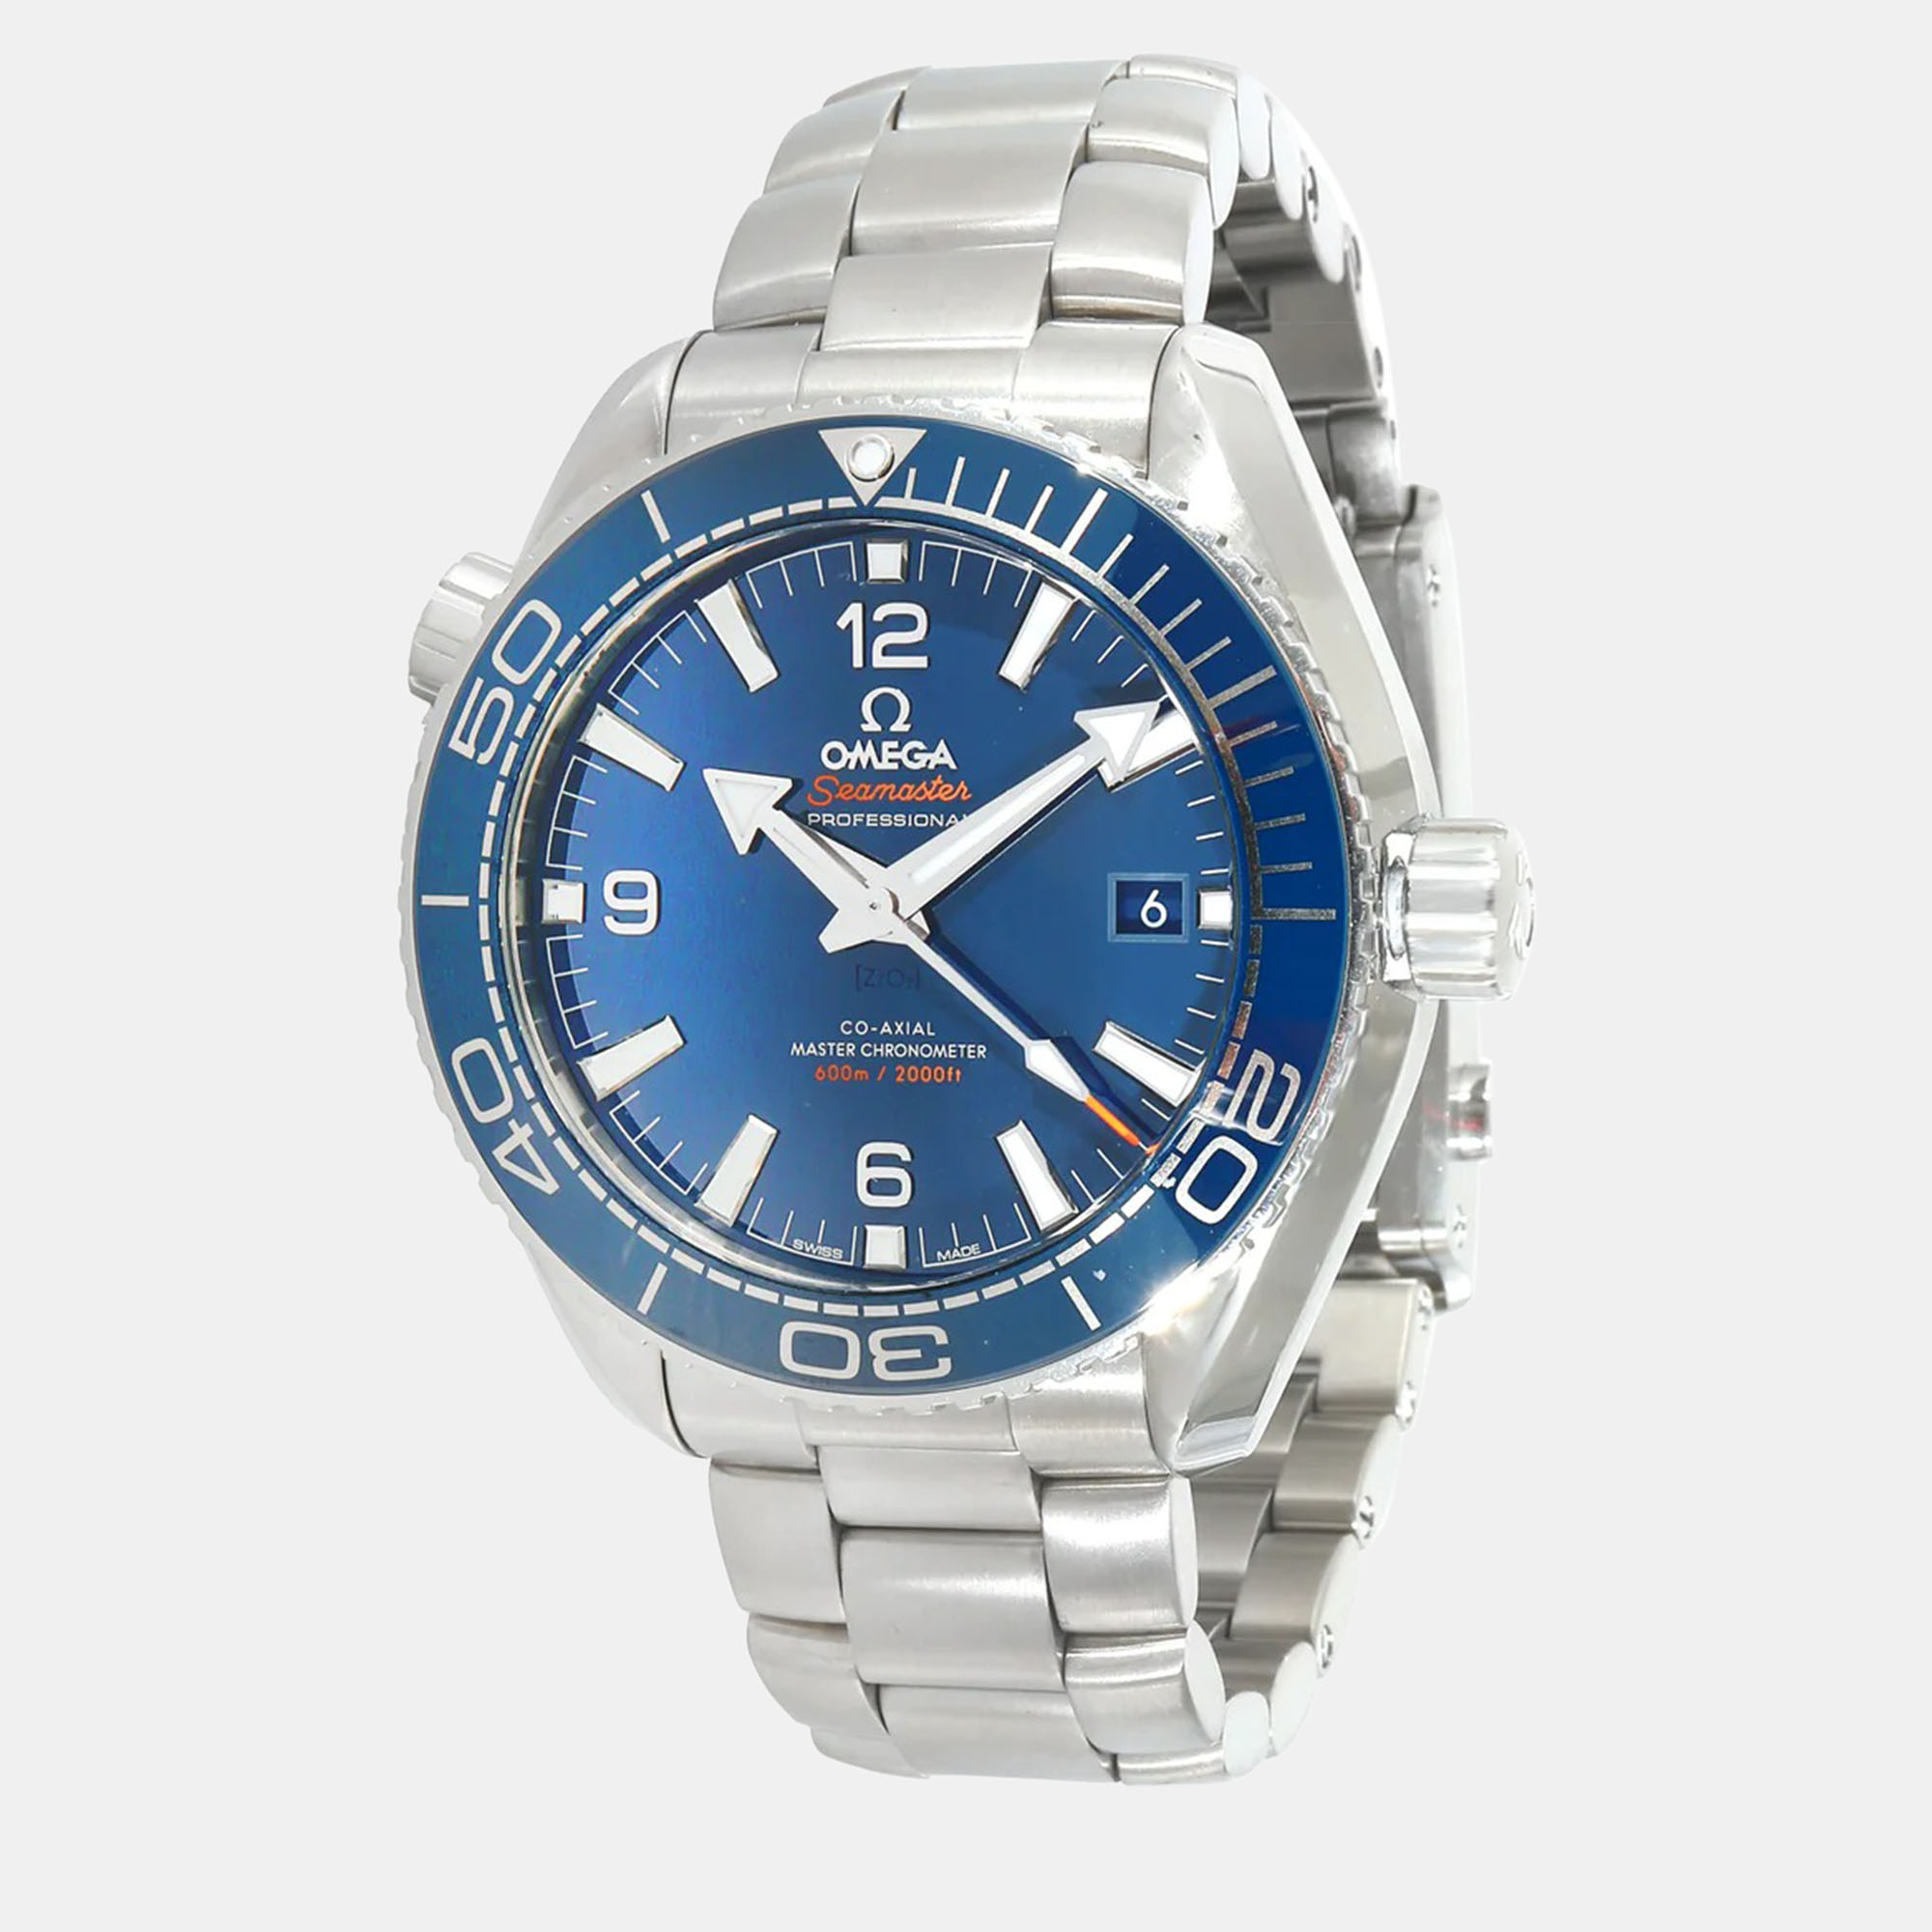 Omega blue stainless steel seamaster planet ocean 232.30.42.21.01.001 automatic men's wristwatch 43.5 mm